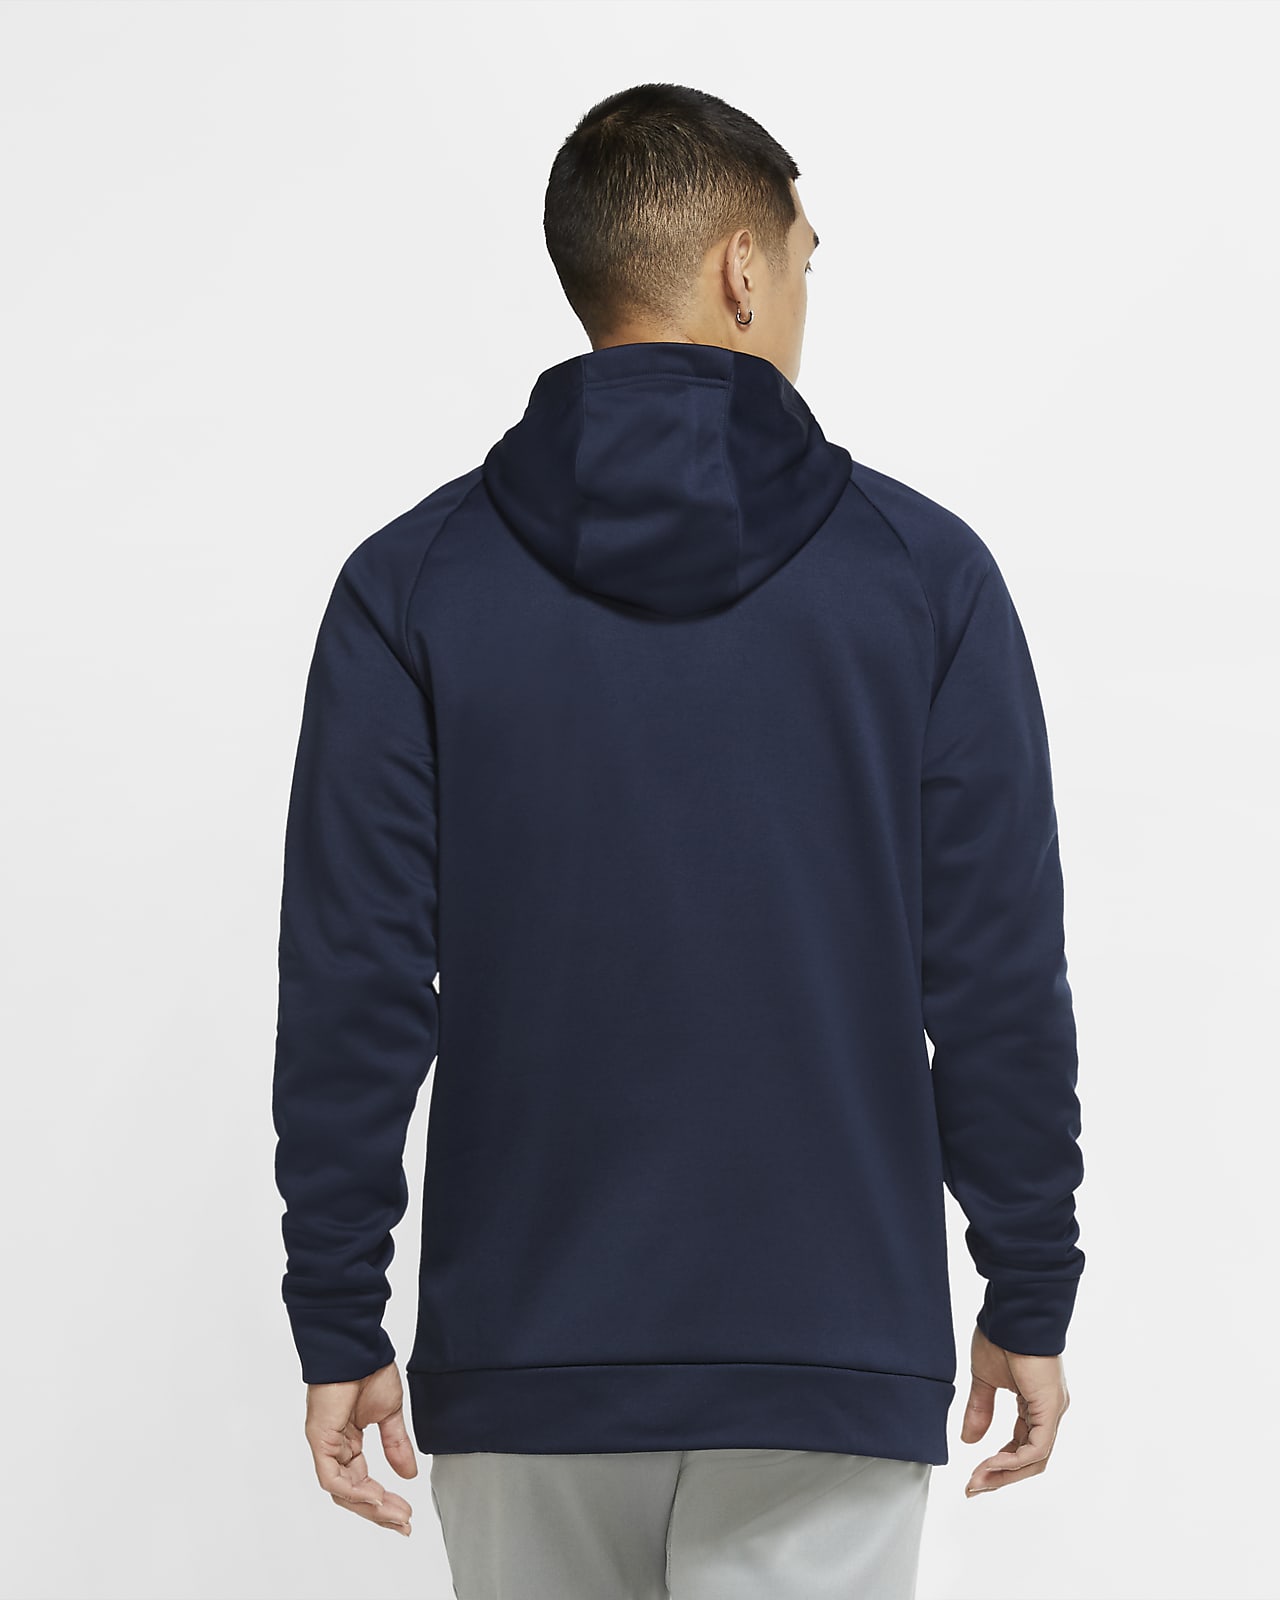 nike therma training pullover hoodie